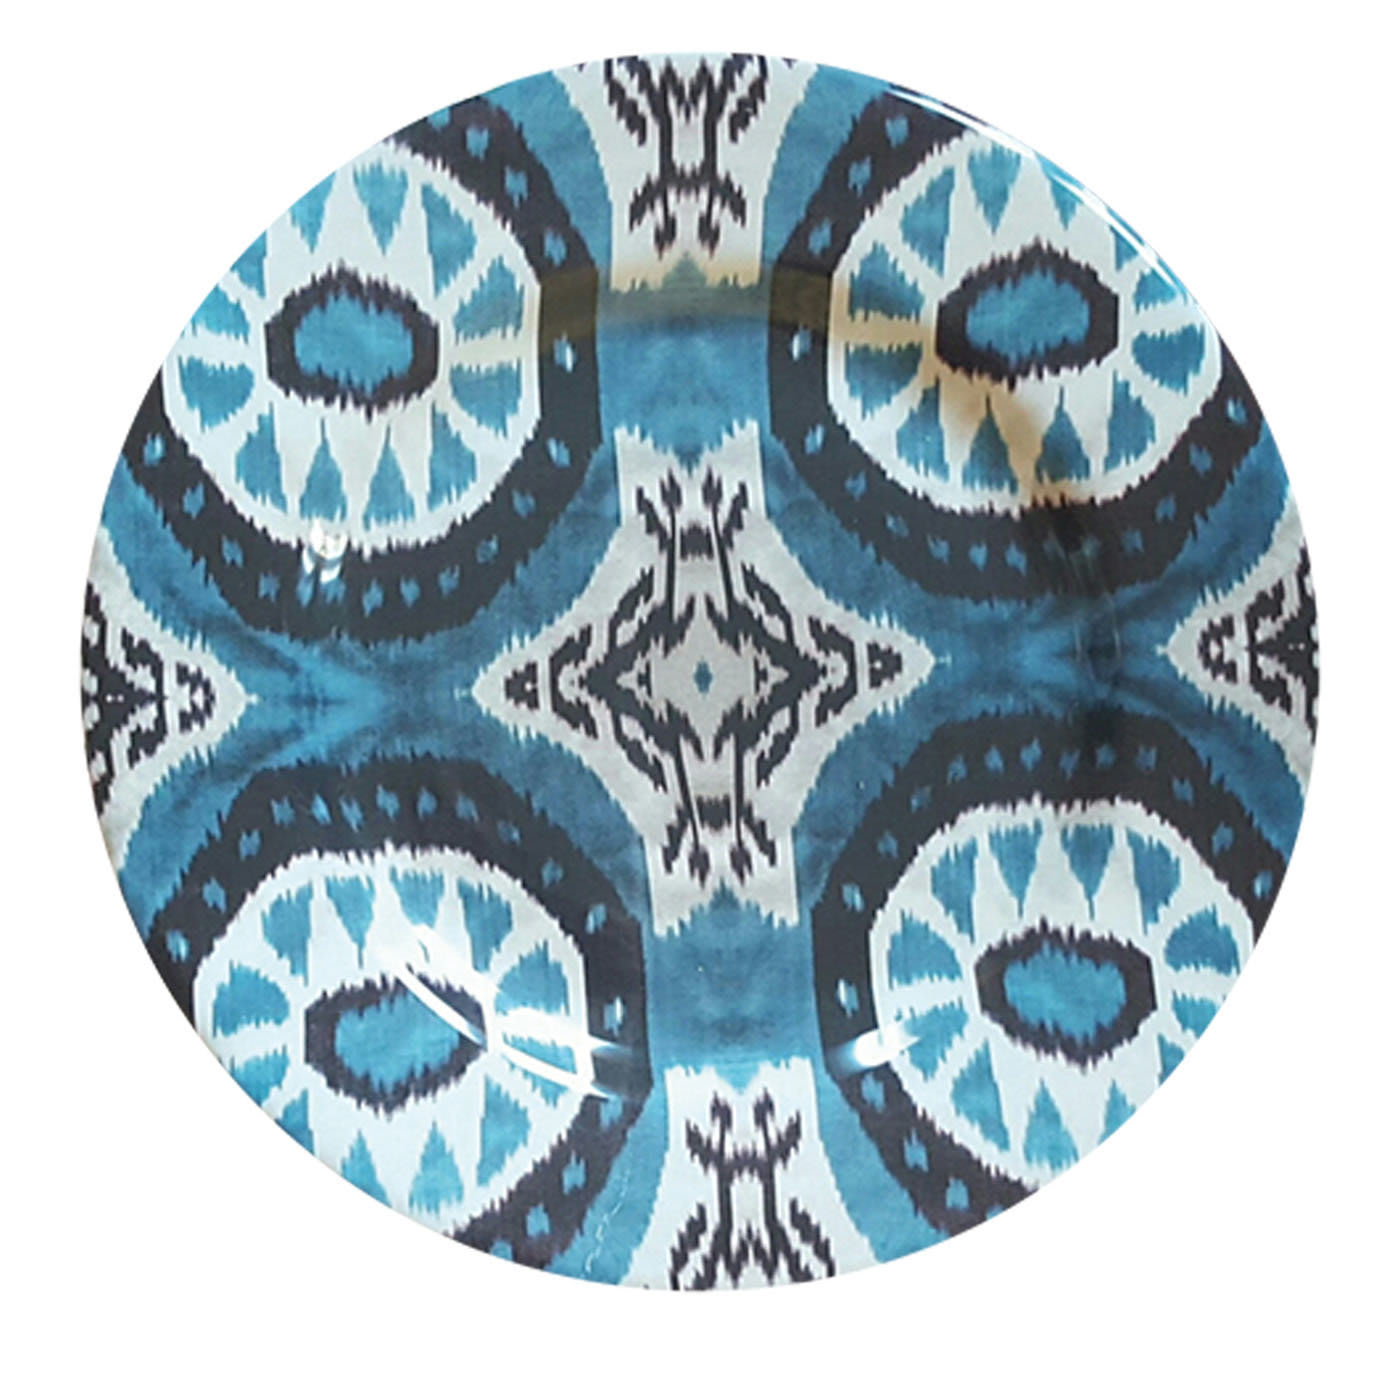 Set of 6 Ikat Porcelain Plates in Green and Blue - Les Ottomans